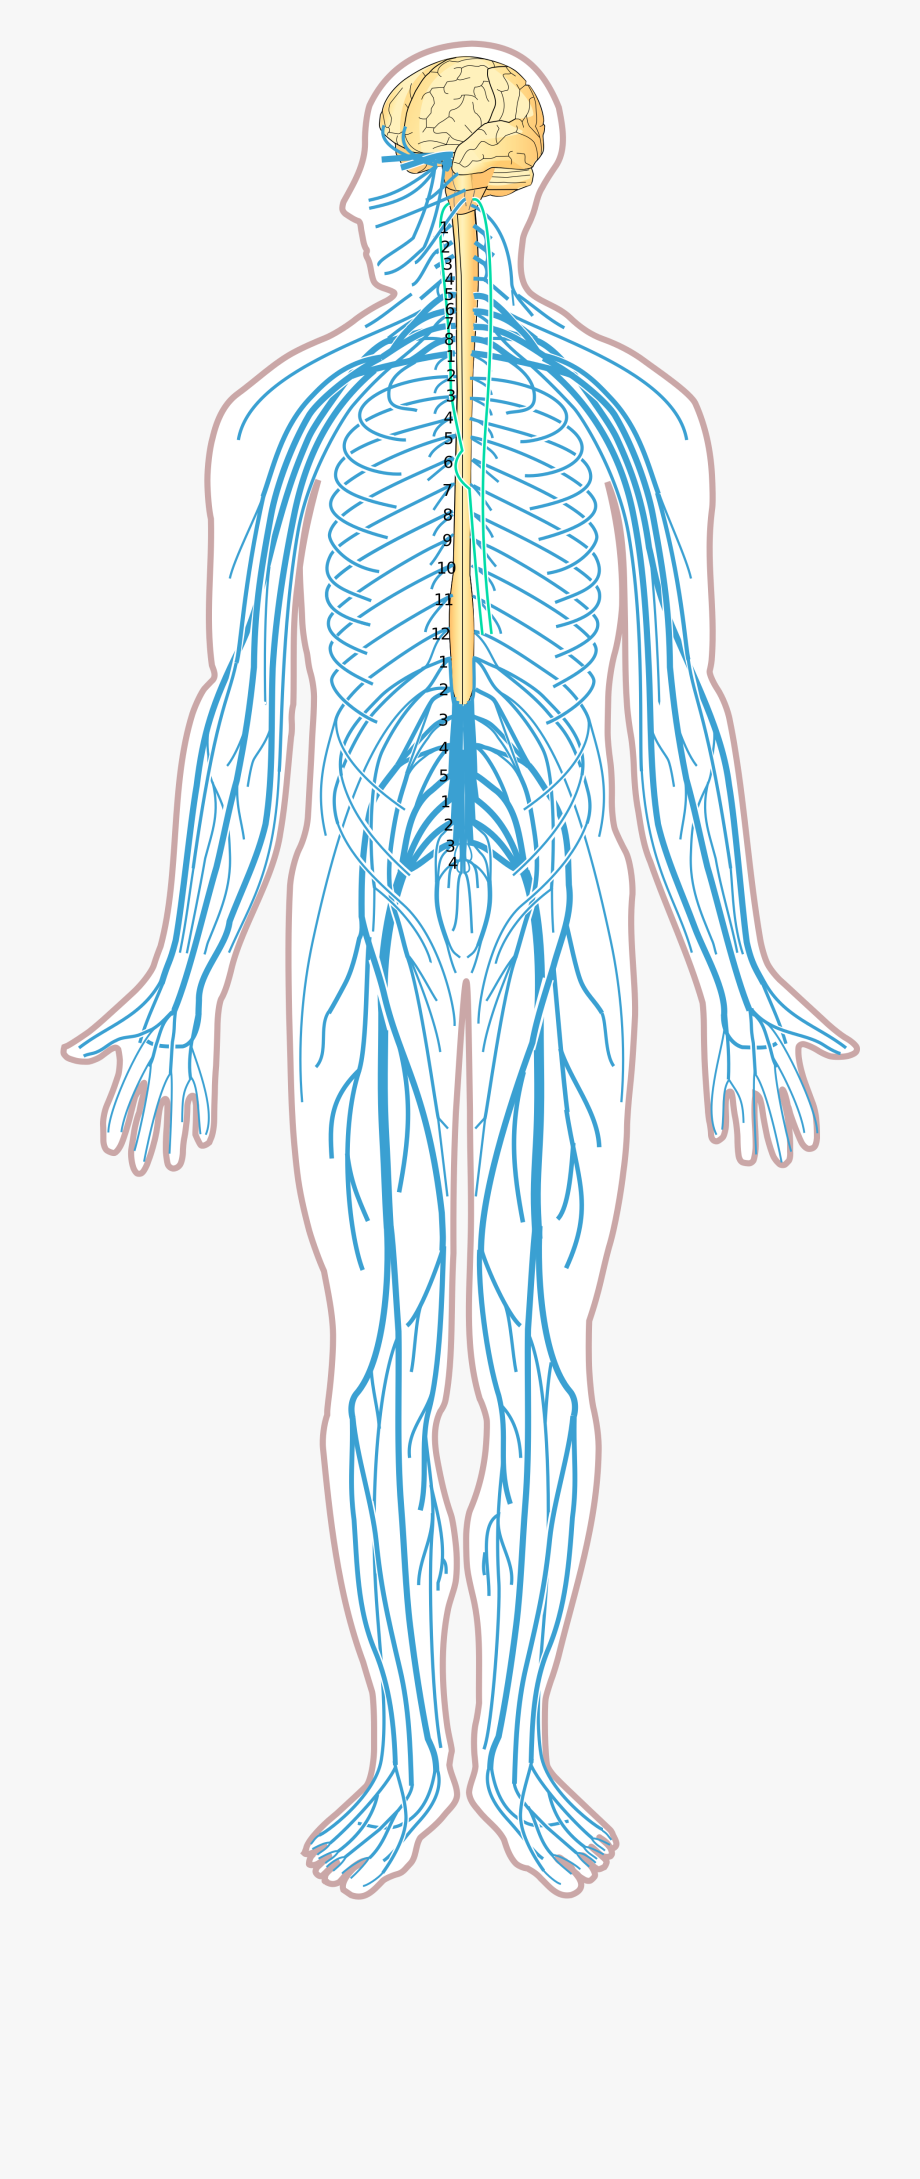 Muscle clipart unlabeled, Muscle unlabeled Transparent ...